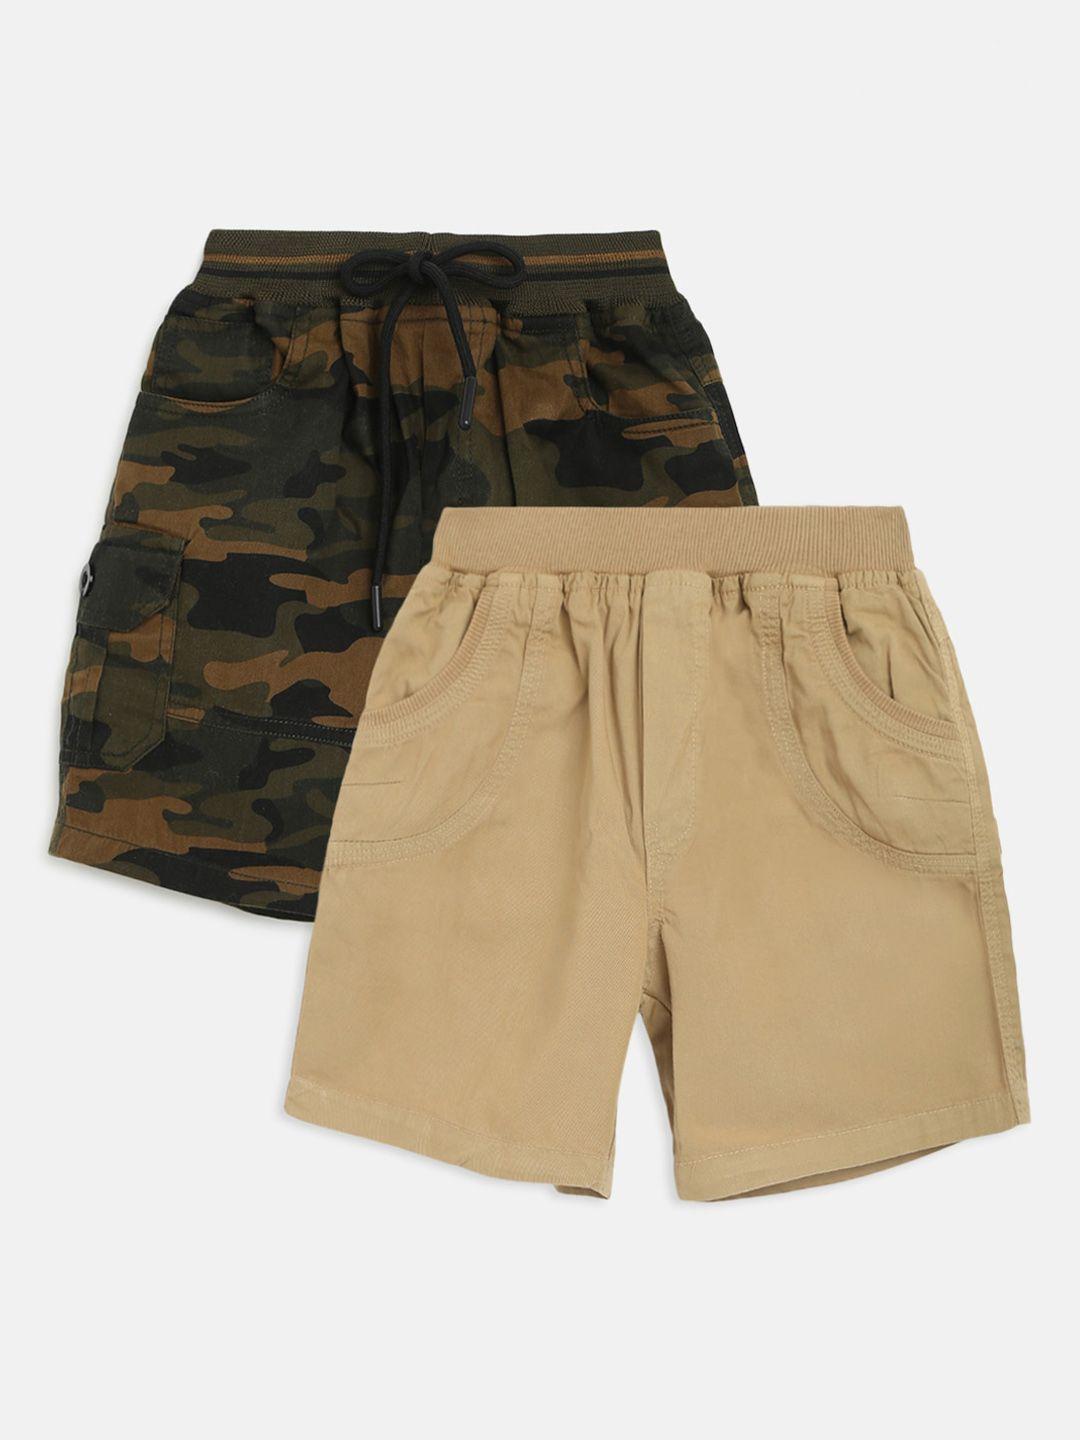 homegrown-boys-olive-green-&-brown-camouflage-outdoor-shorts